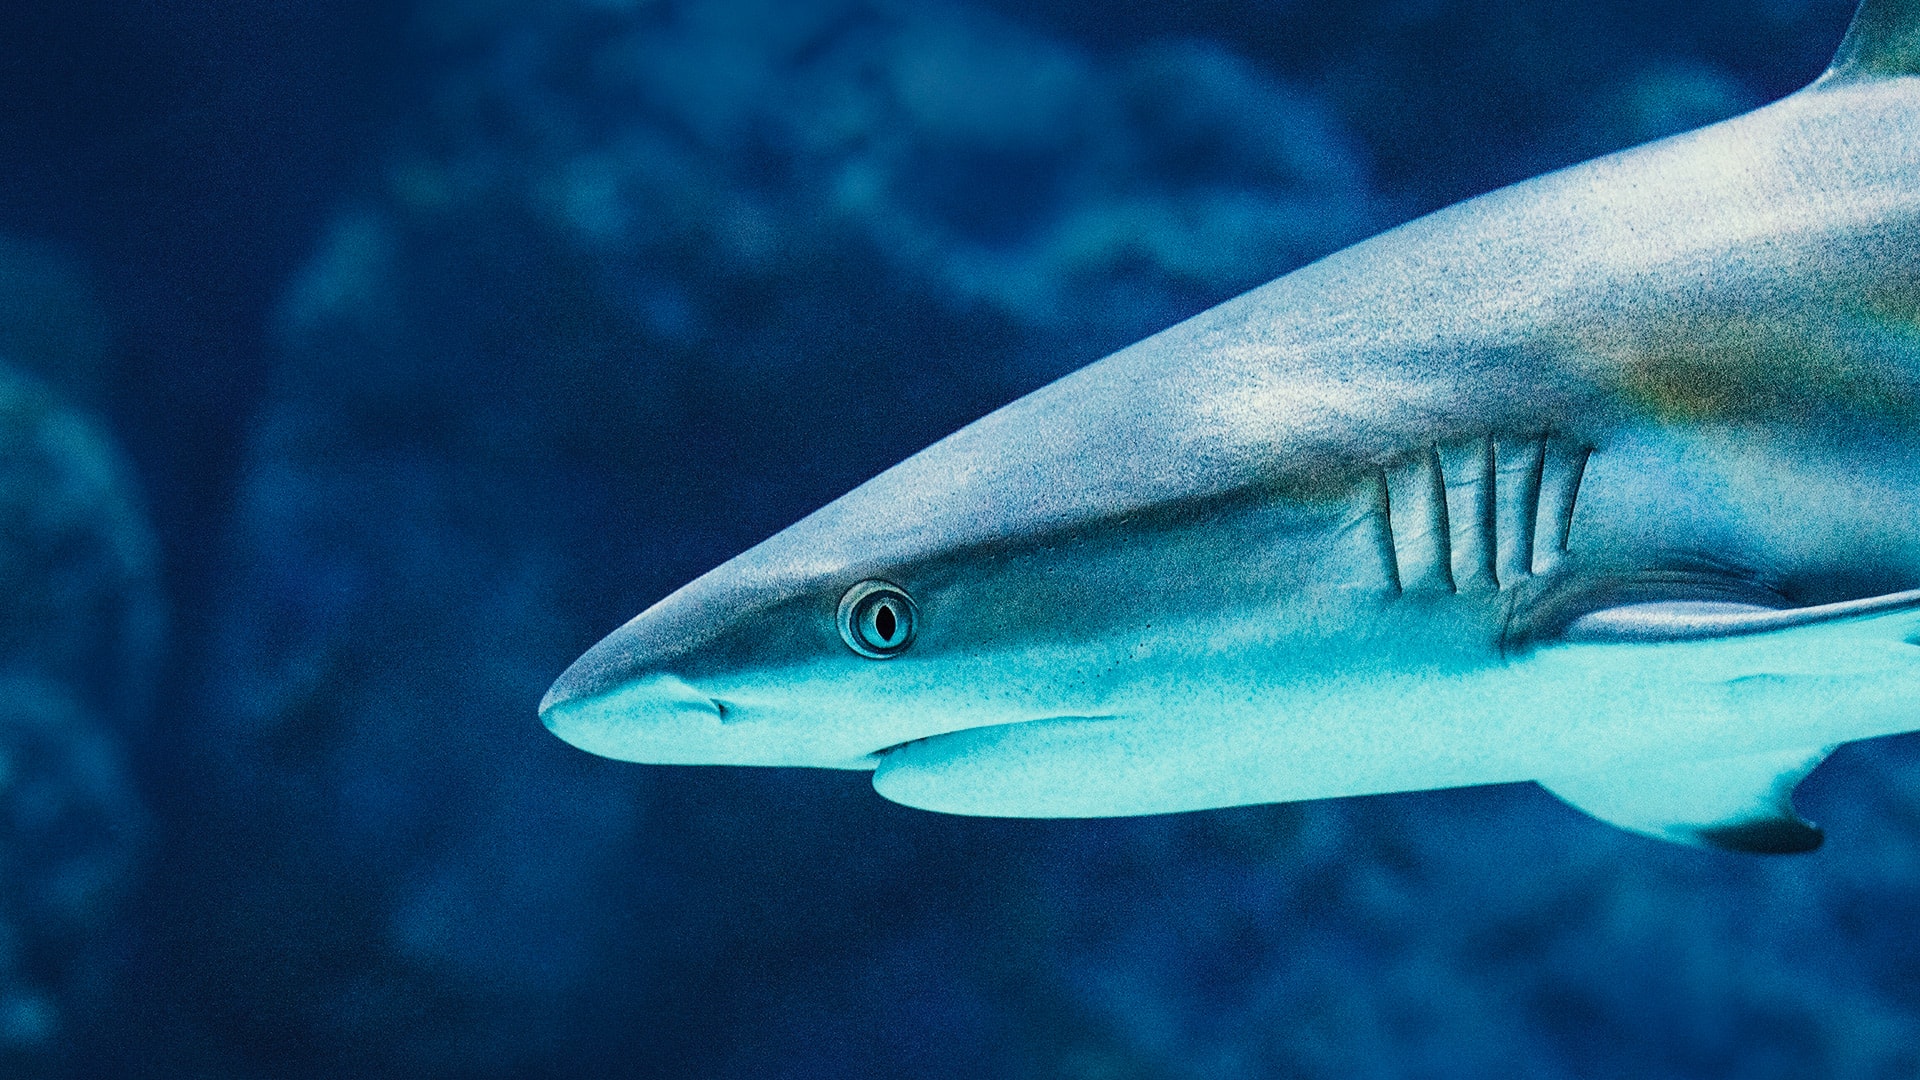 How to watch Shark Week 2019 live without cable